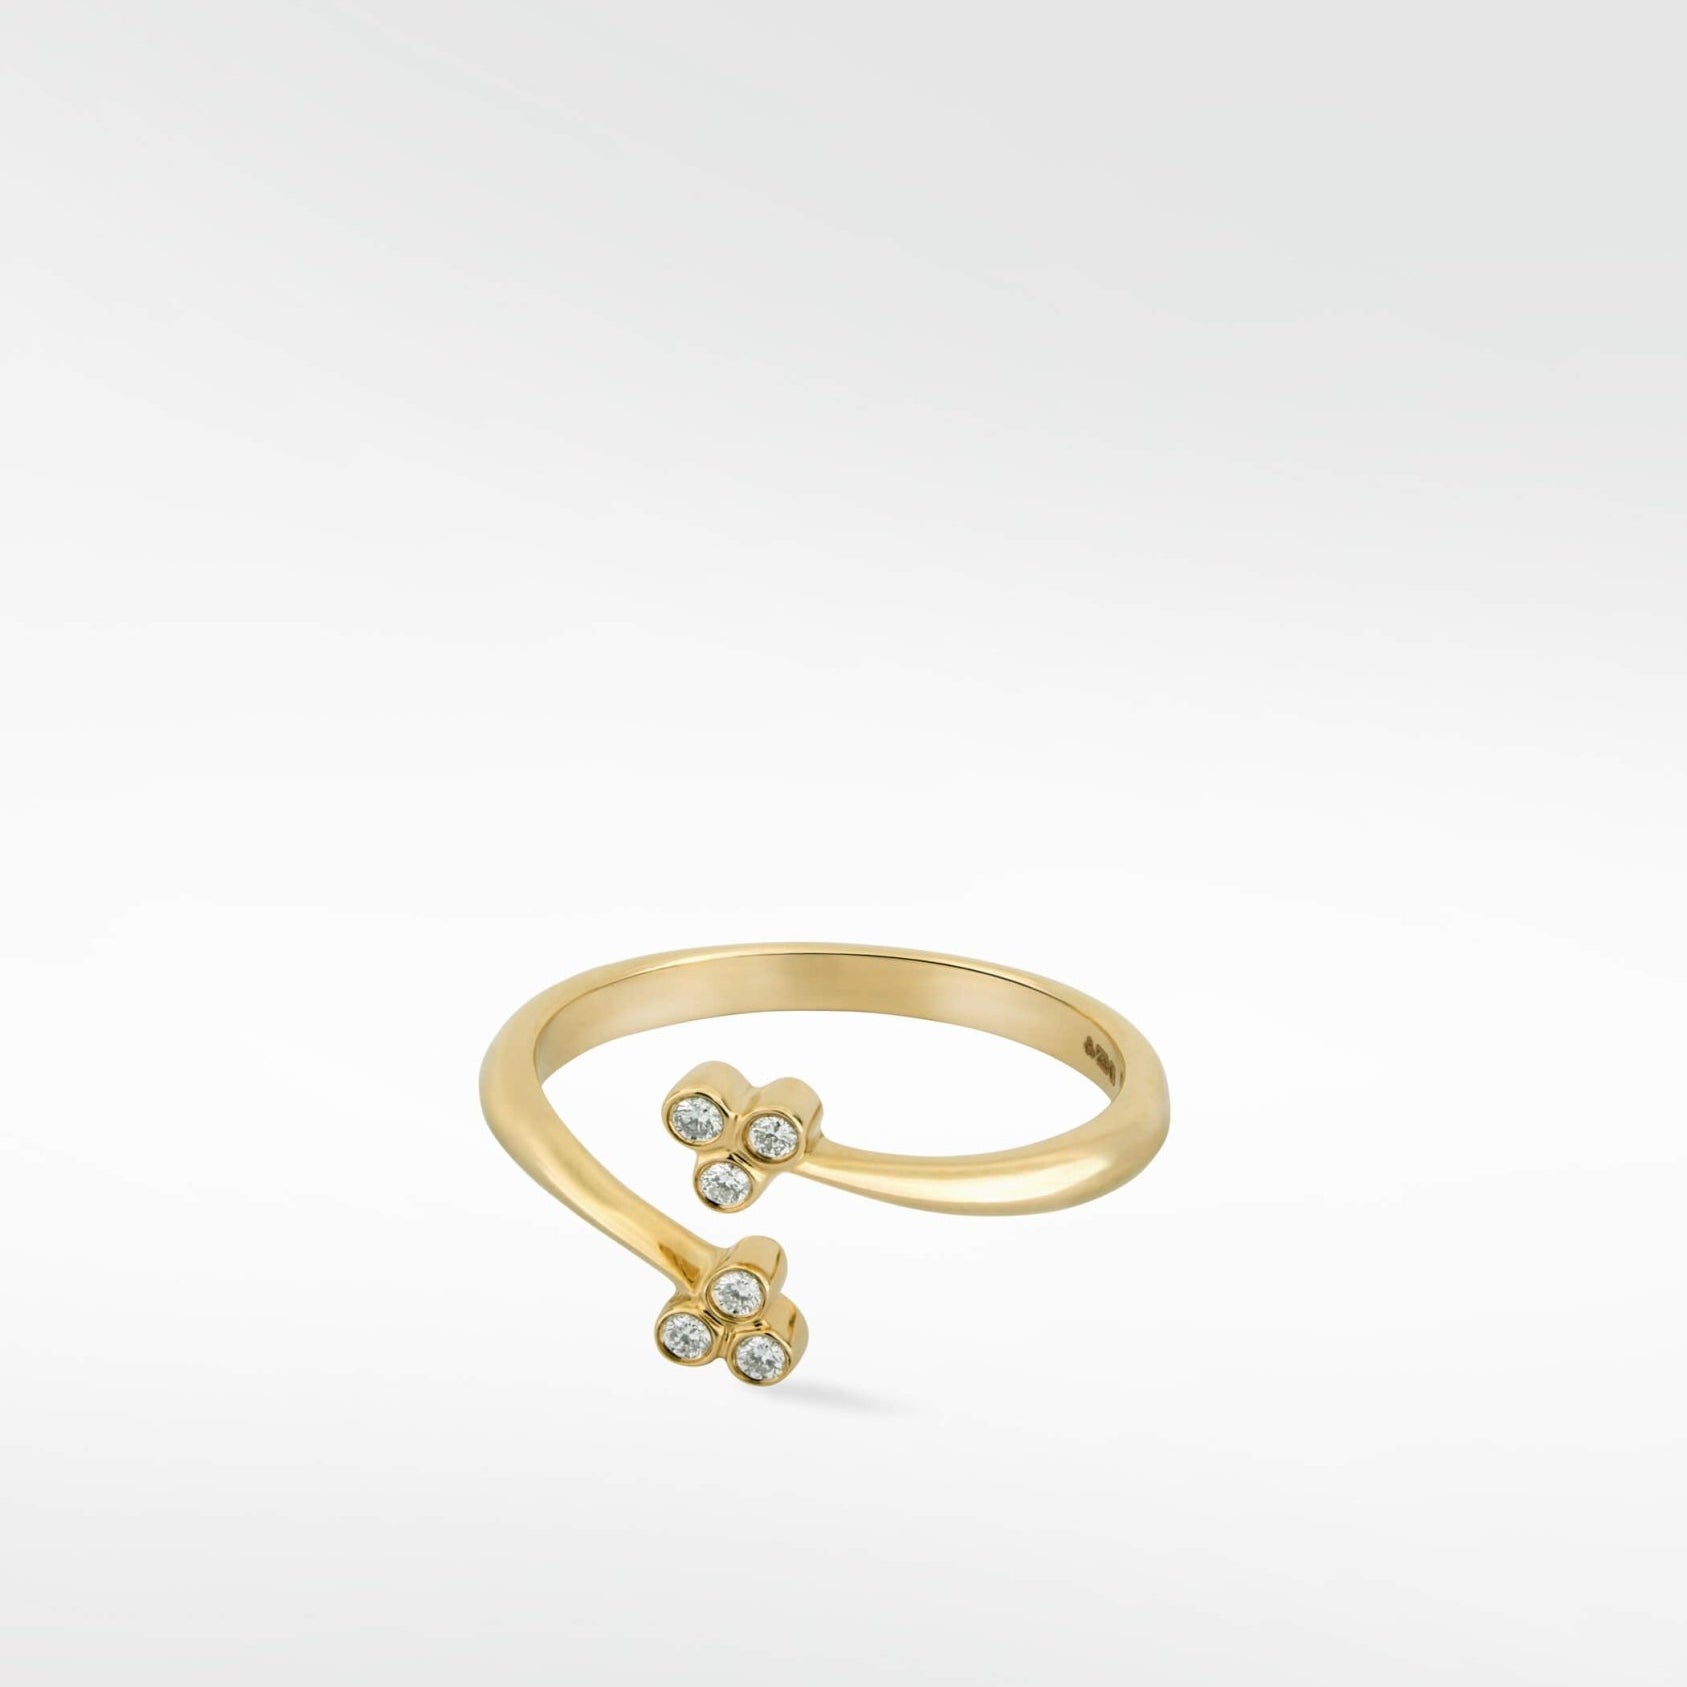 Trinity Wrap Ring in 14K Gold - Lark and Berry